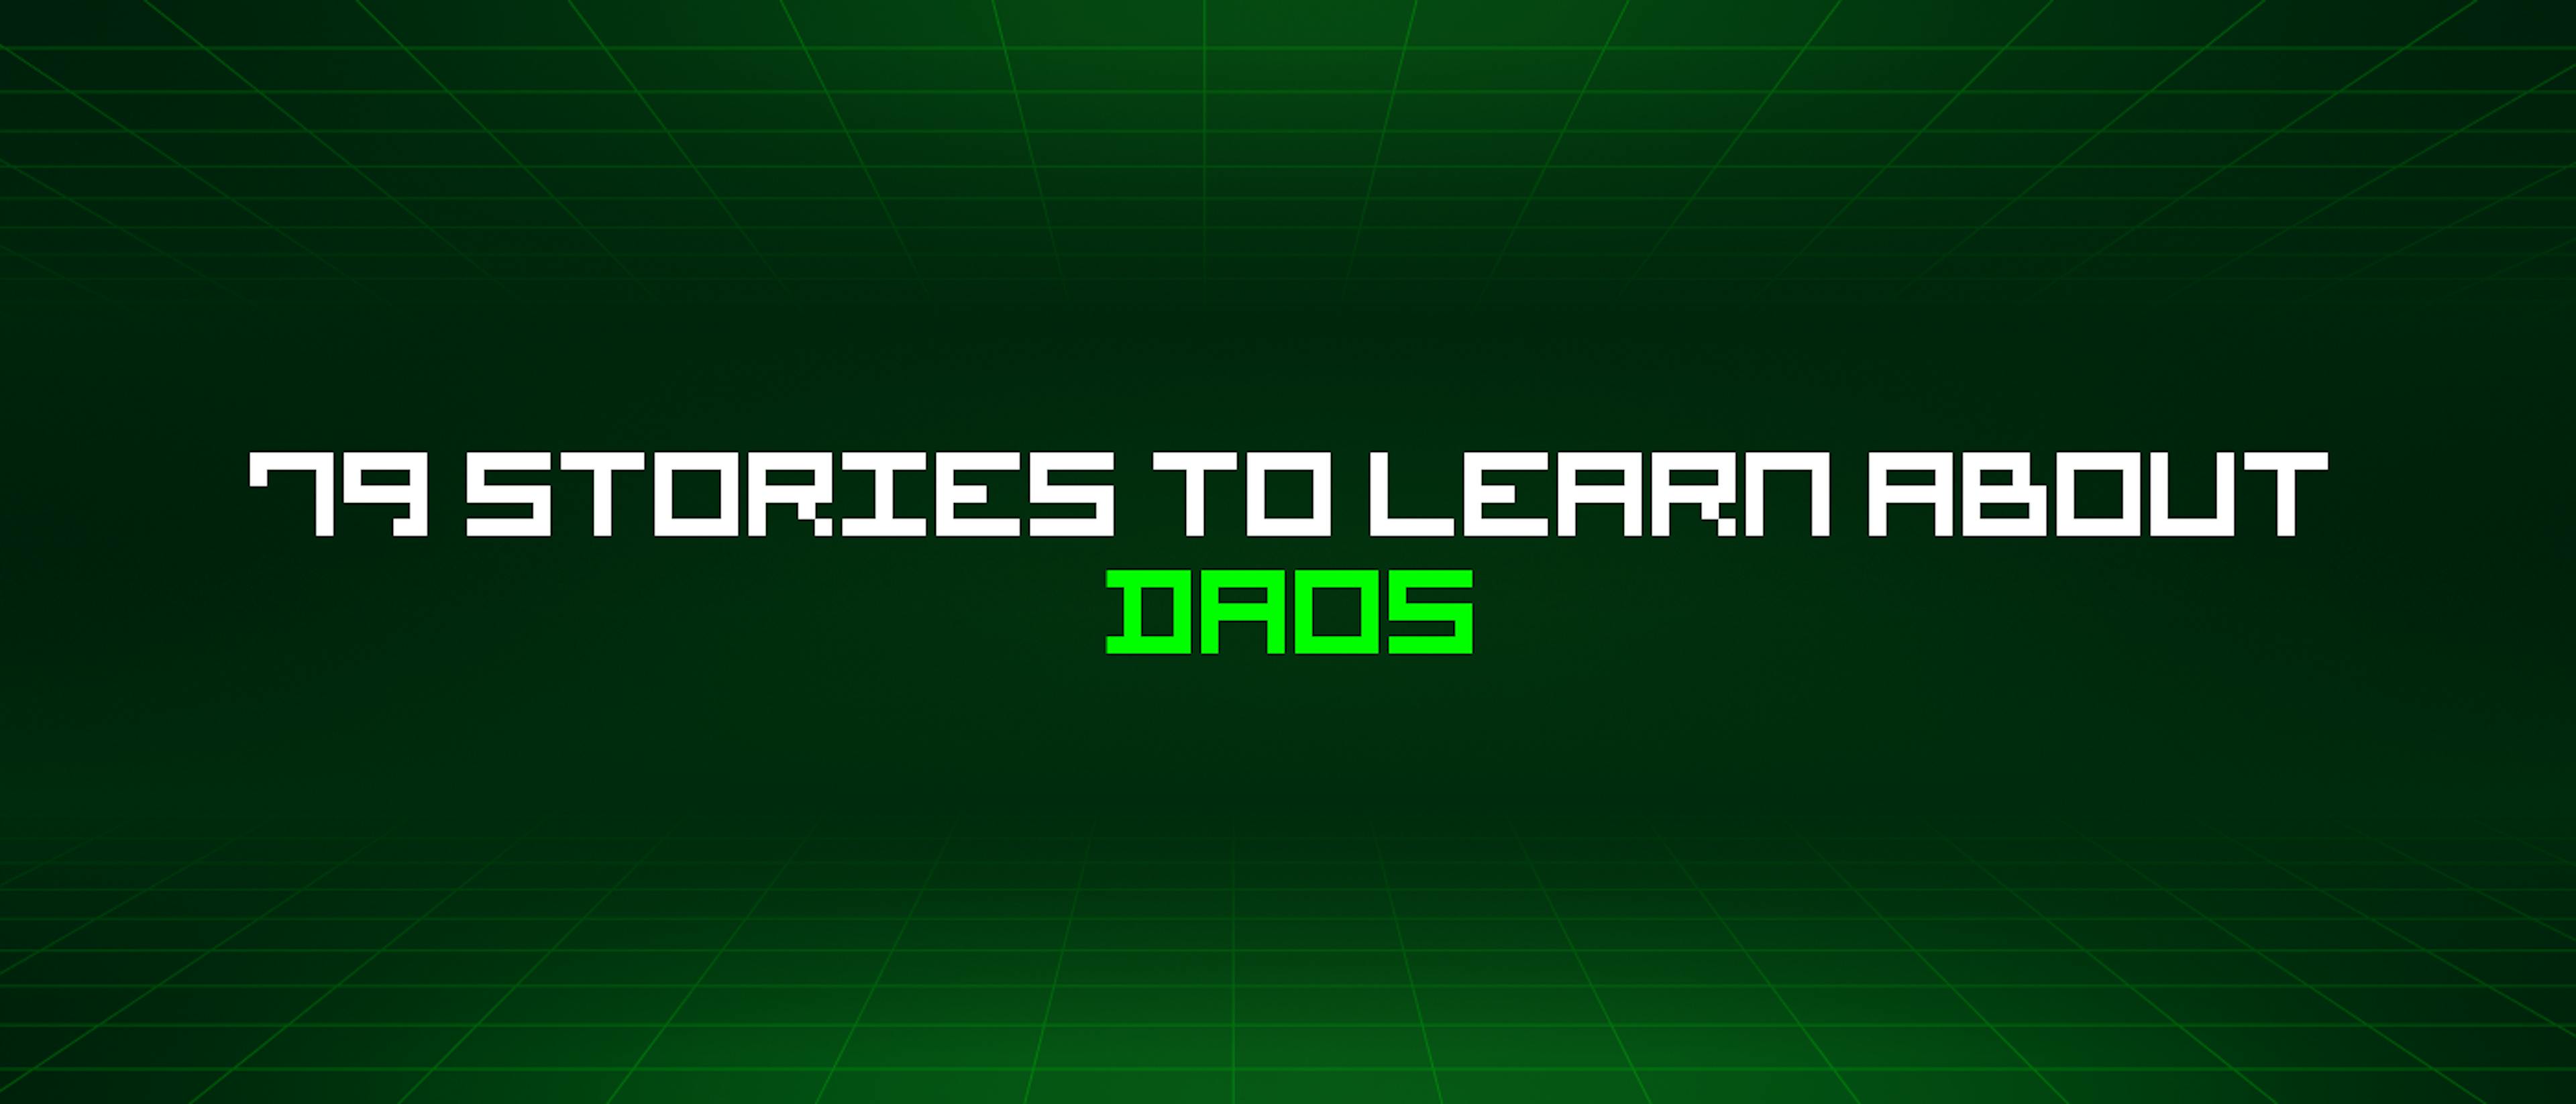 featured image - 79 Stories To Learn About Daos